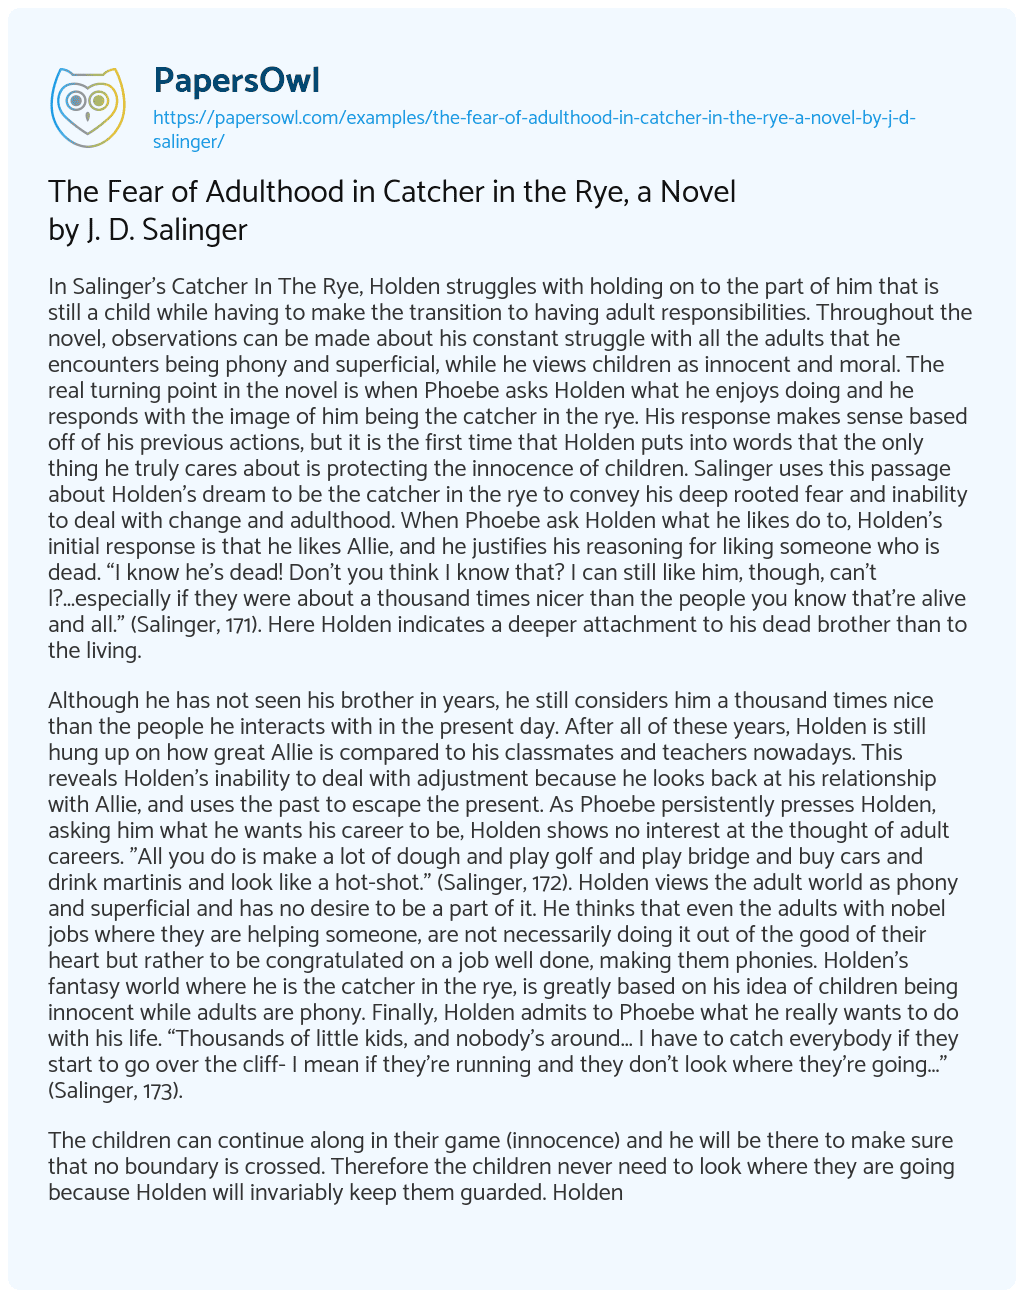 Essay on The Fear of Adulthood in Catcher in the Rye, a Novel by J. D. Salinger